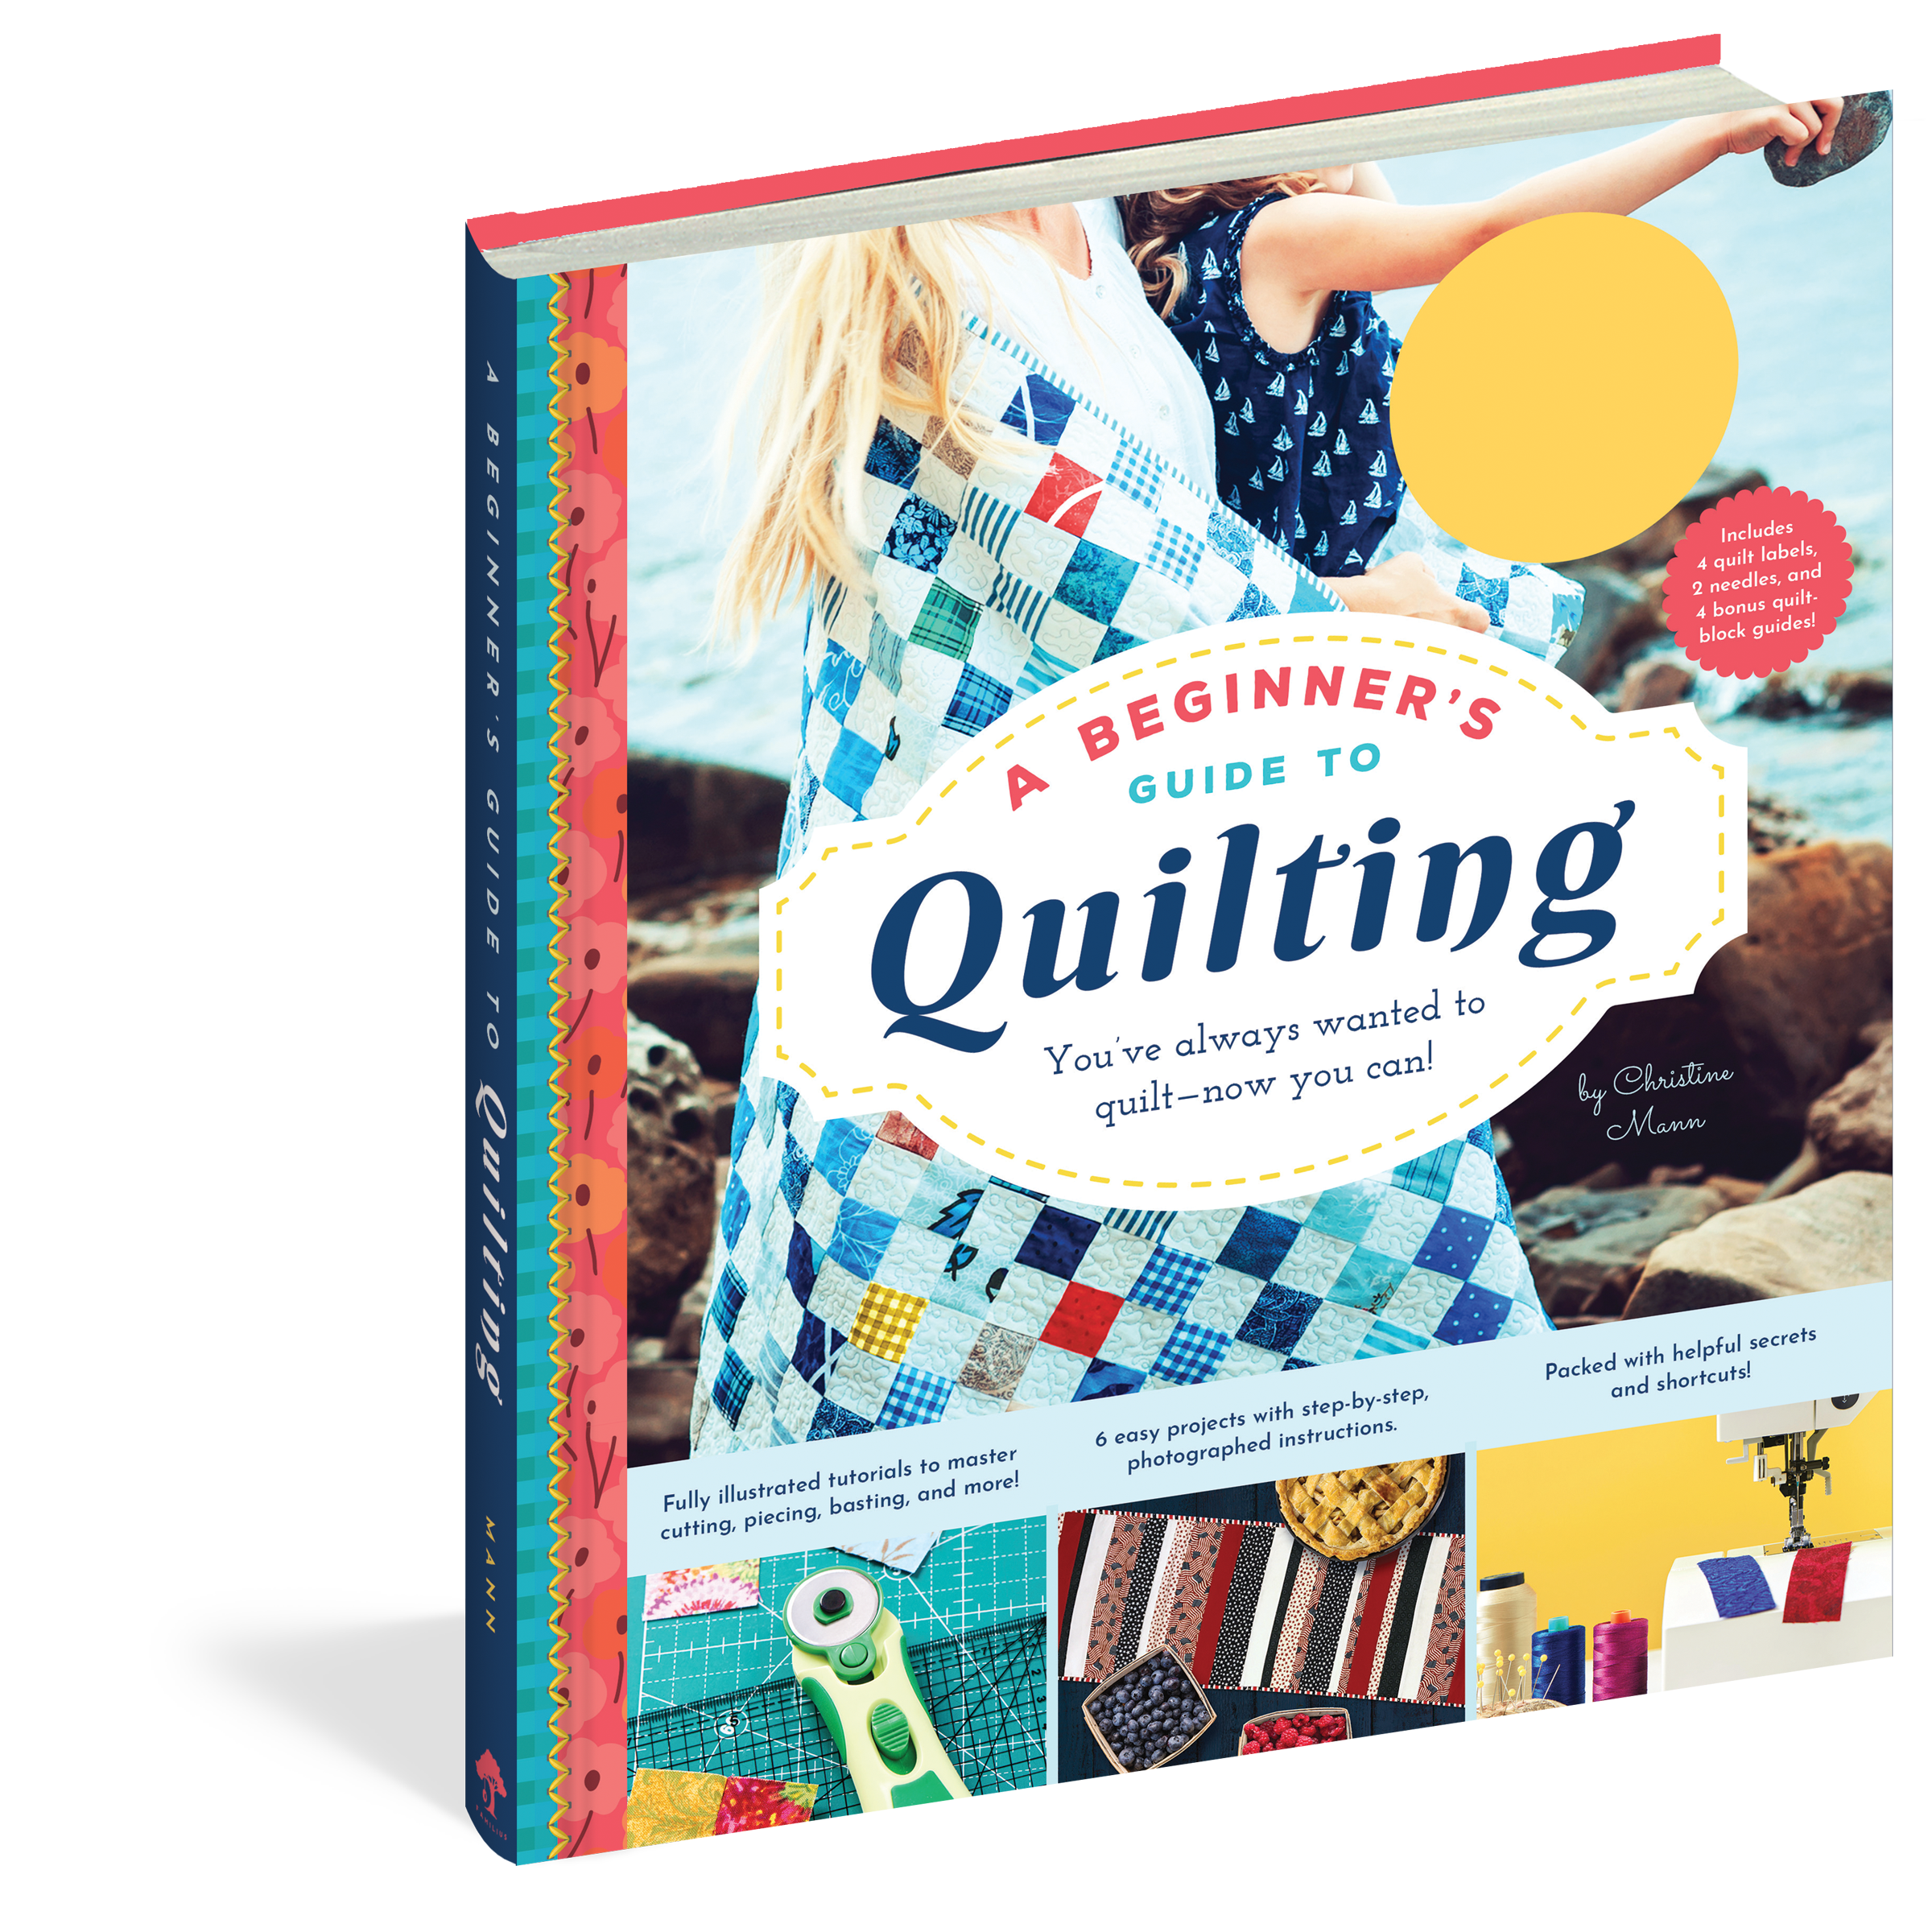 The cover of the book A Beginner's Guide to Quilting.